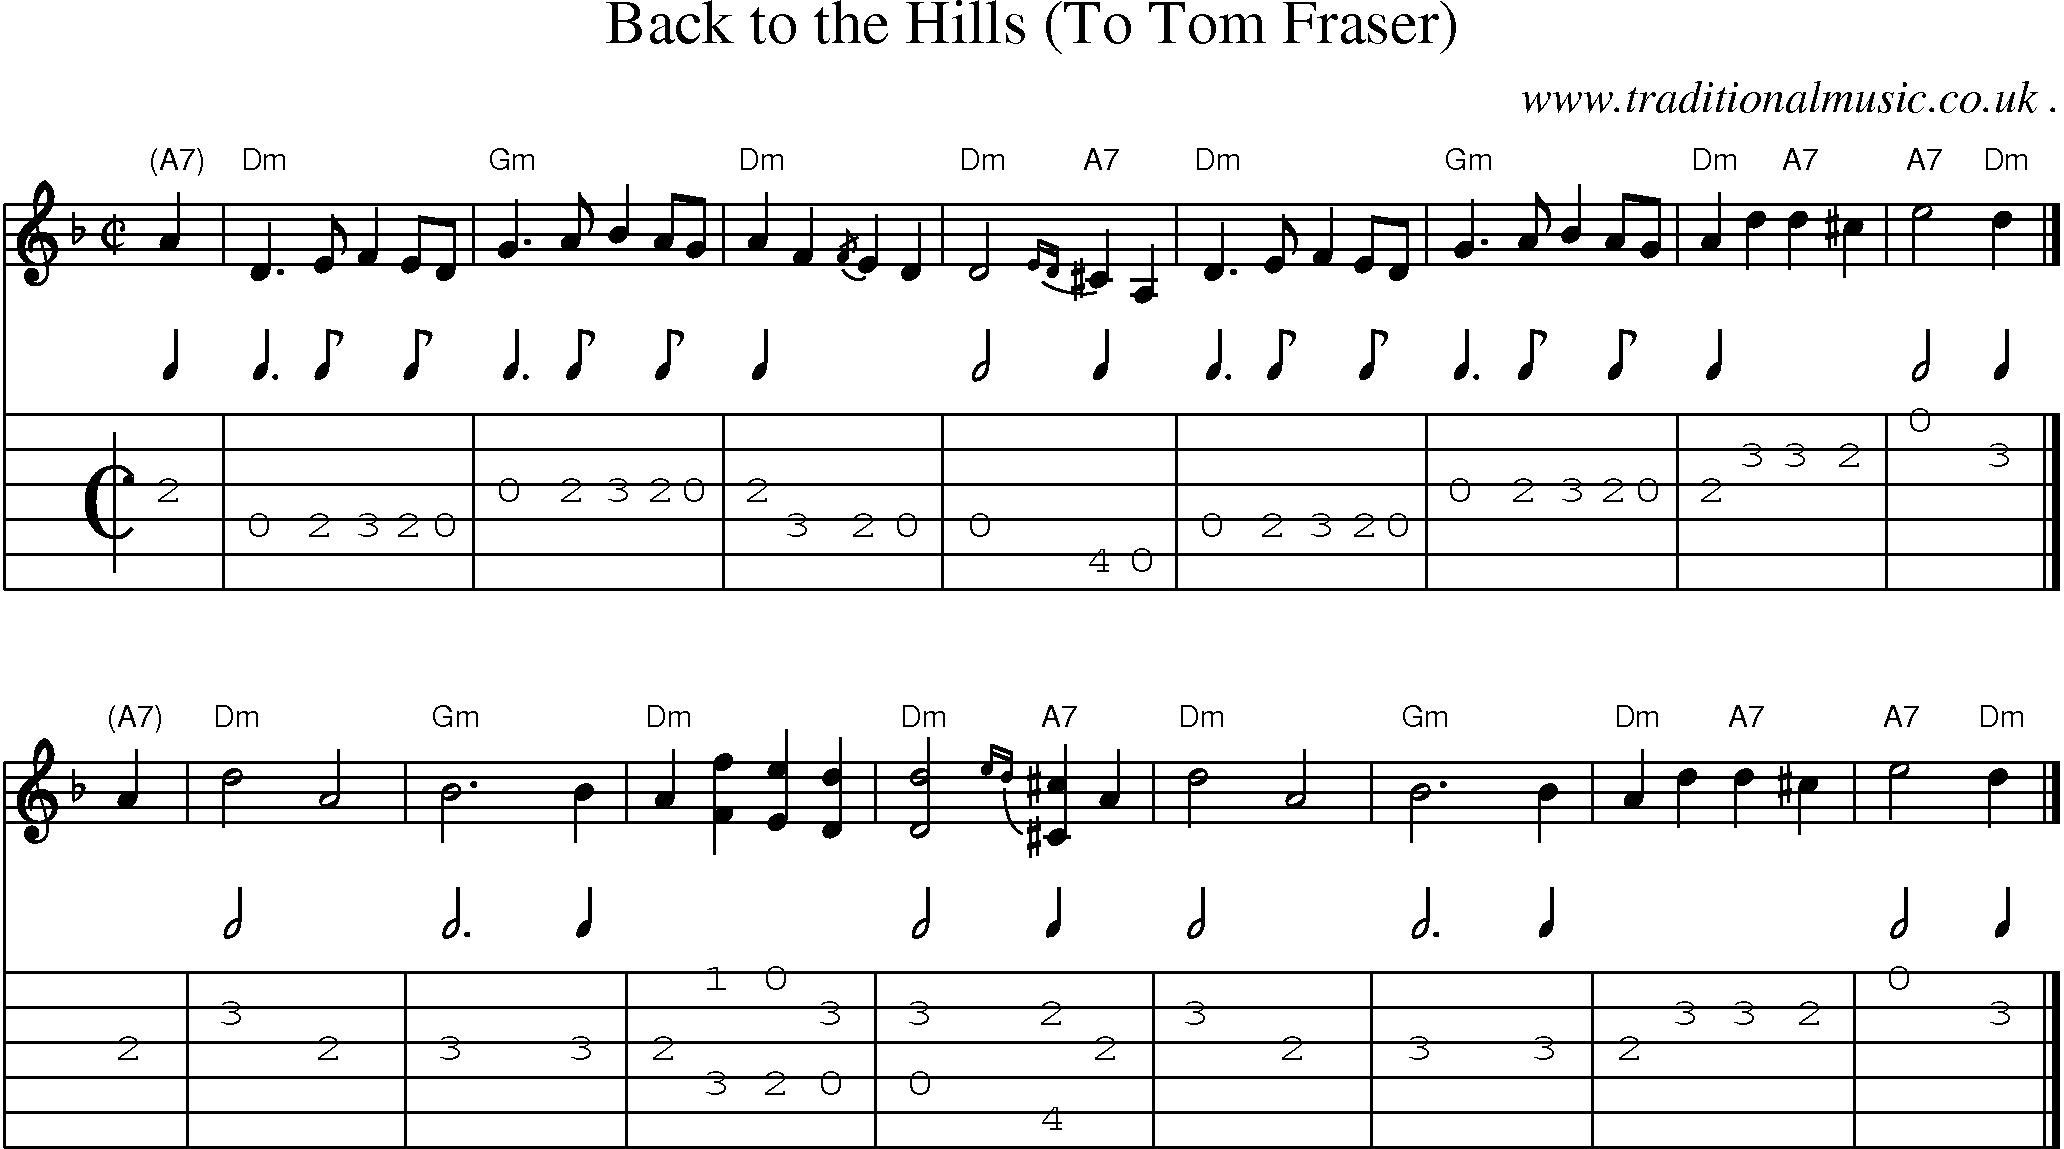 Sheet-music  score, Chords and Guitar Tabs for Back To The Hills To Tom Fraser